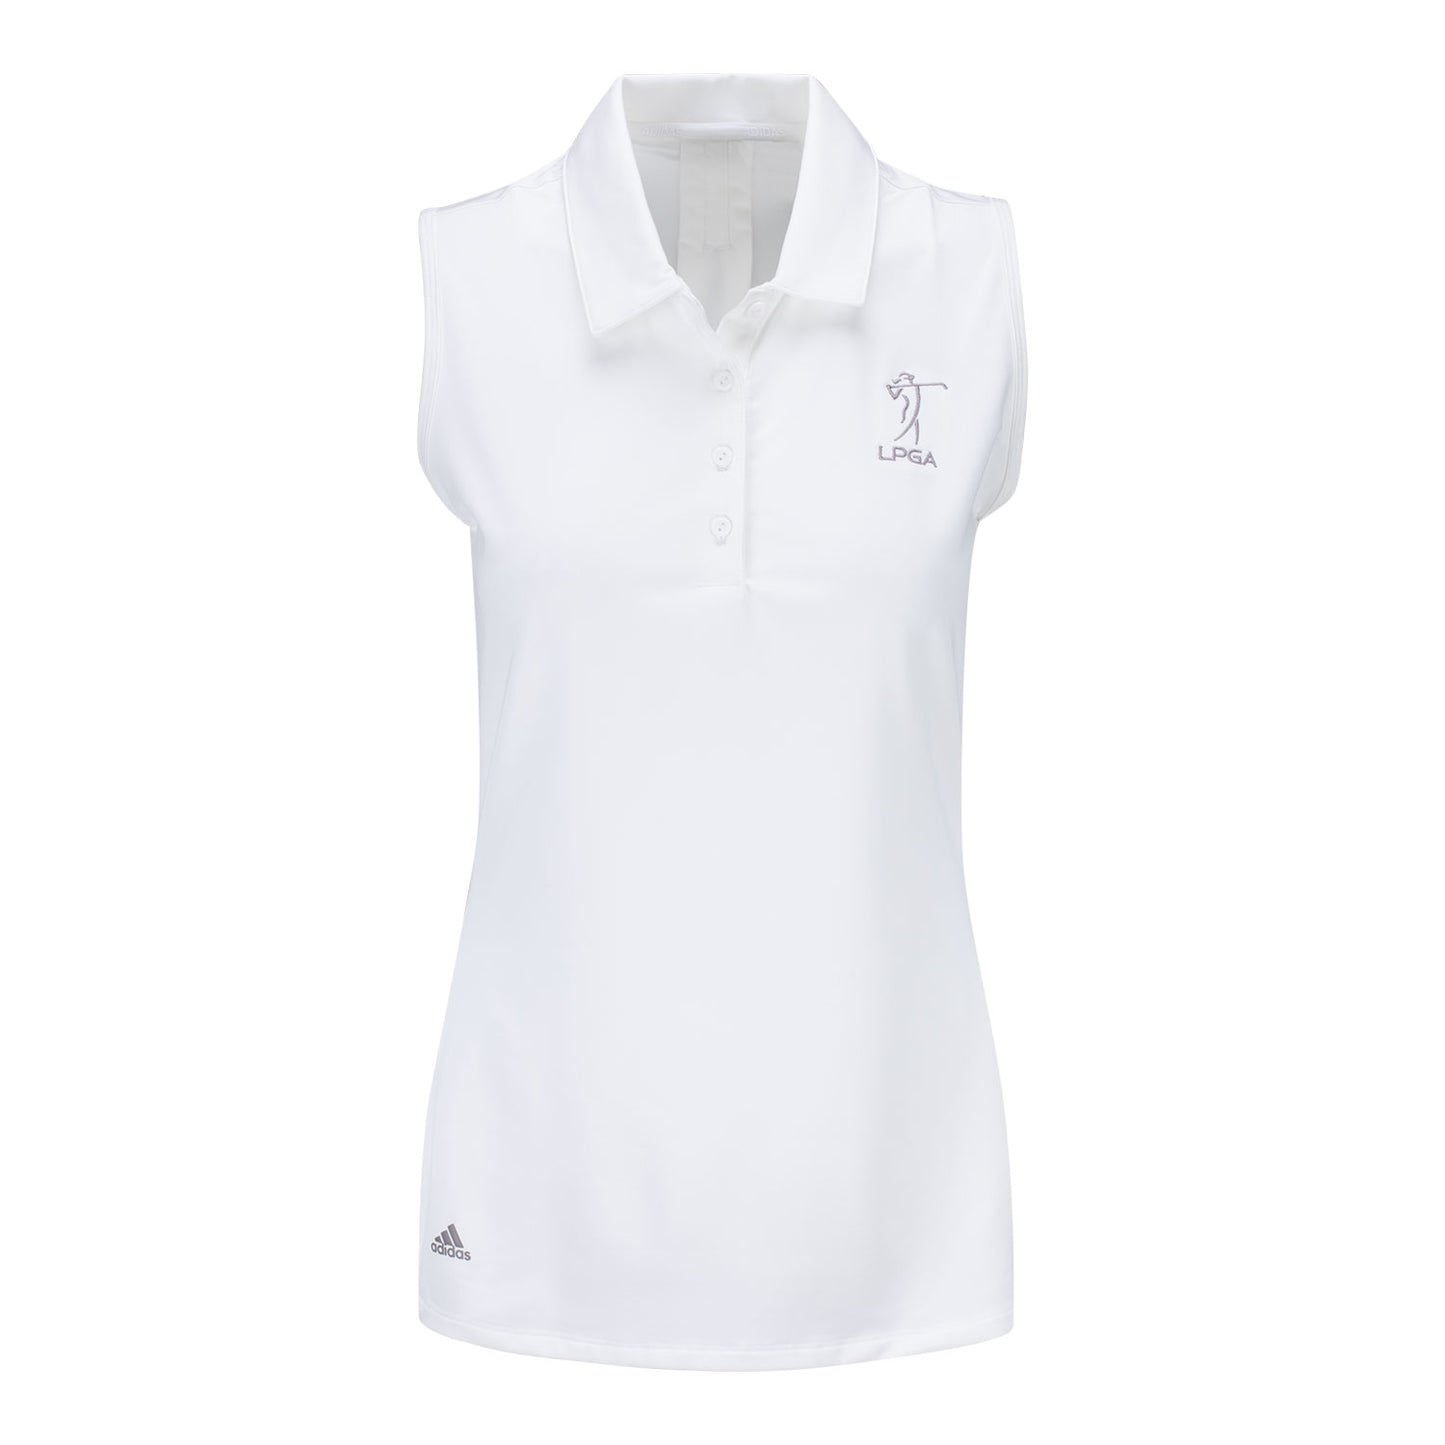 Adidas LPGA Golf Women's Ultimate Sleeveless Solid Polo in White - Front View